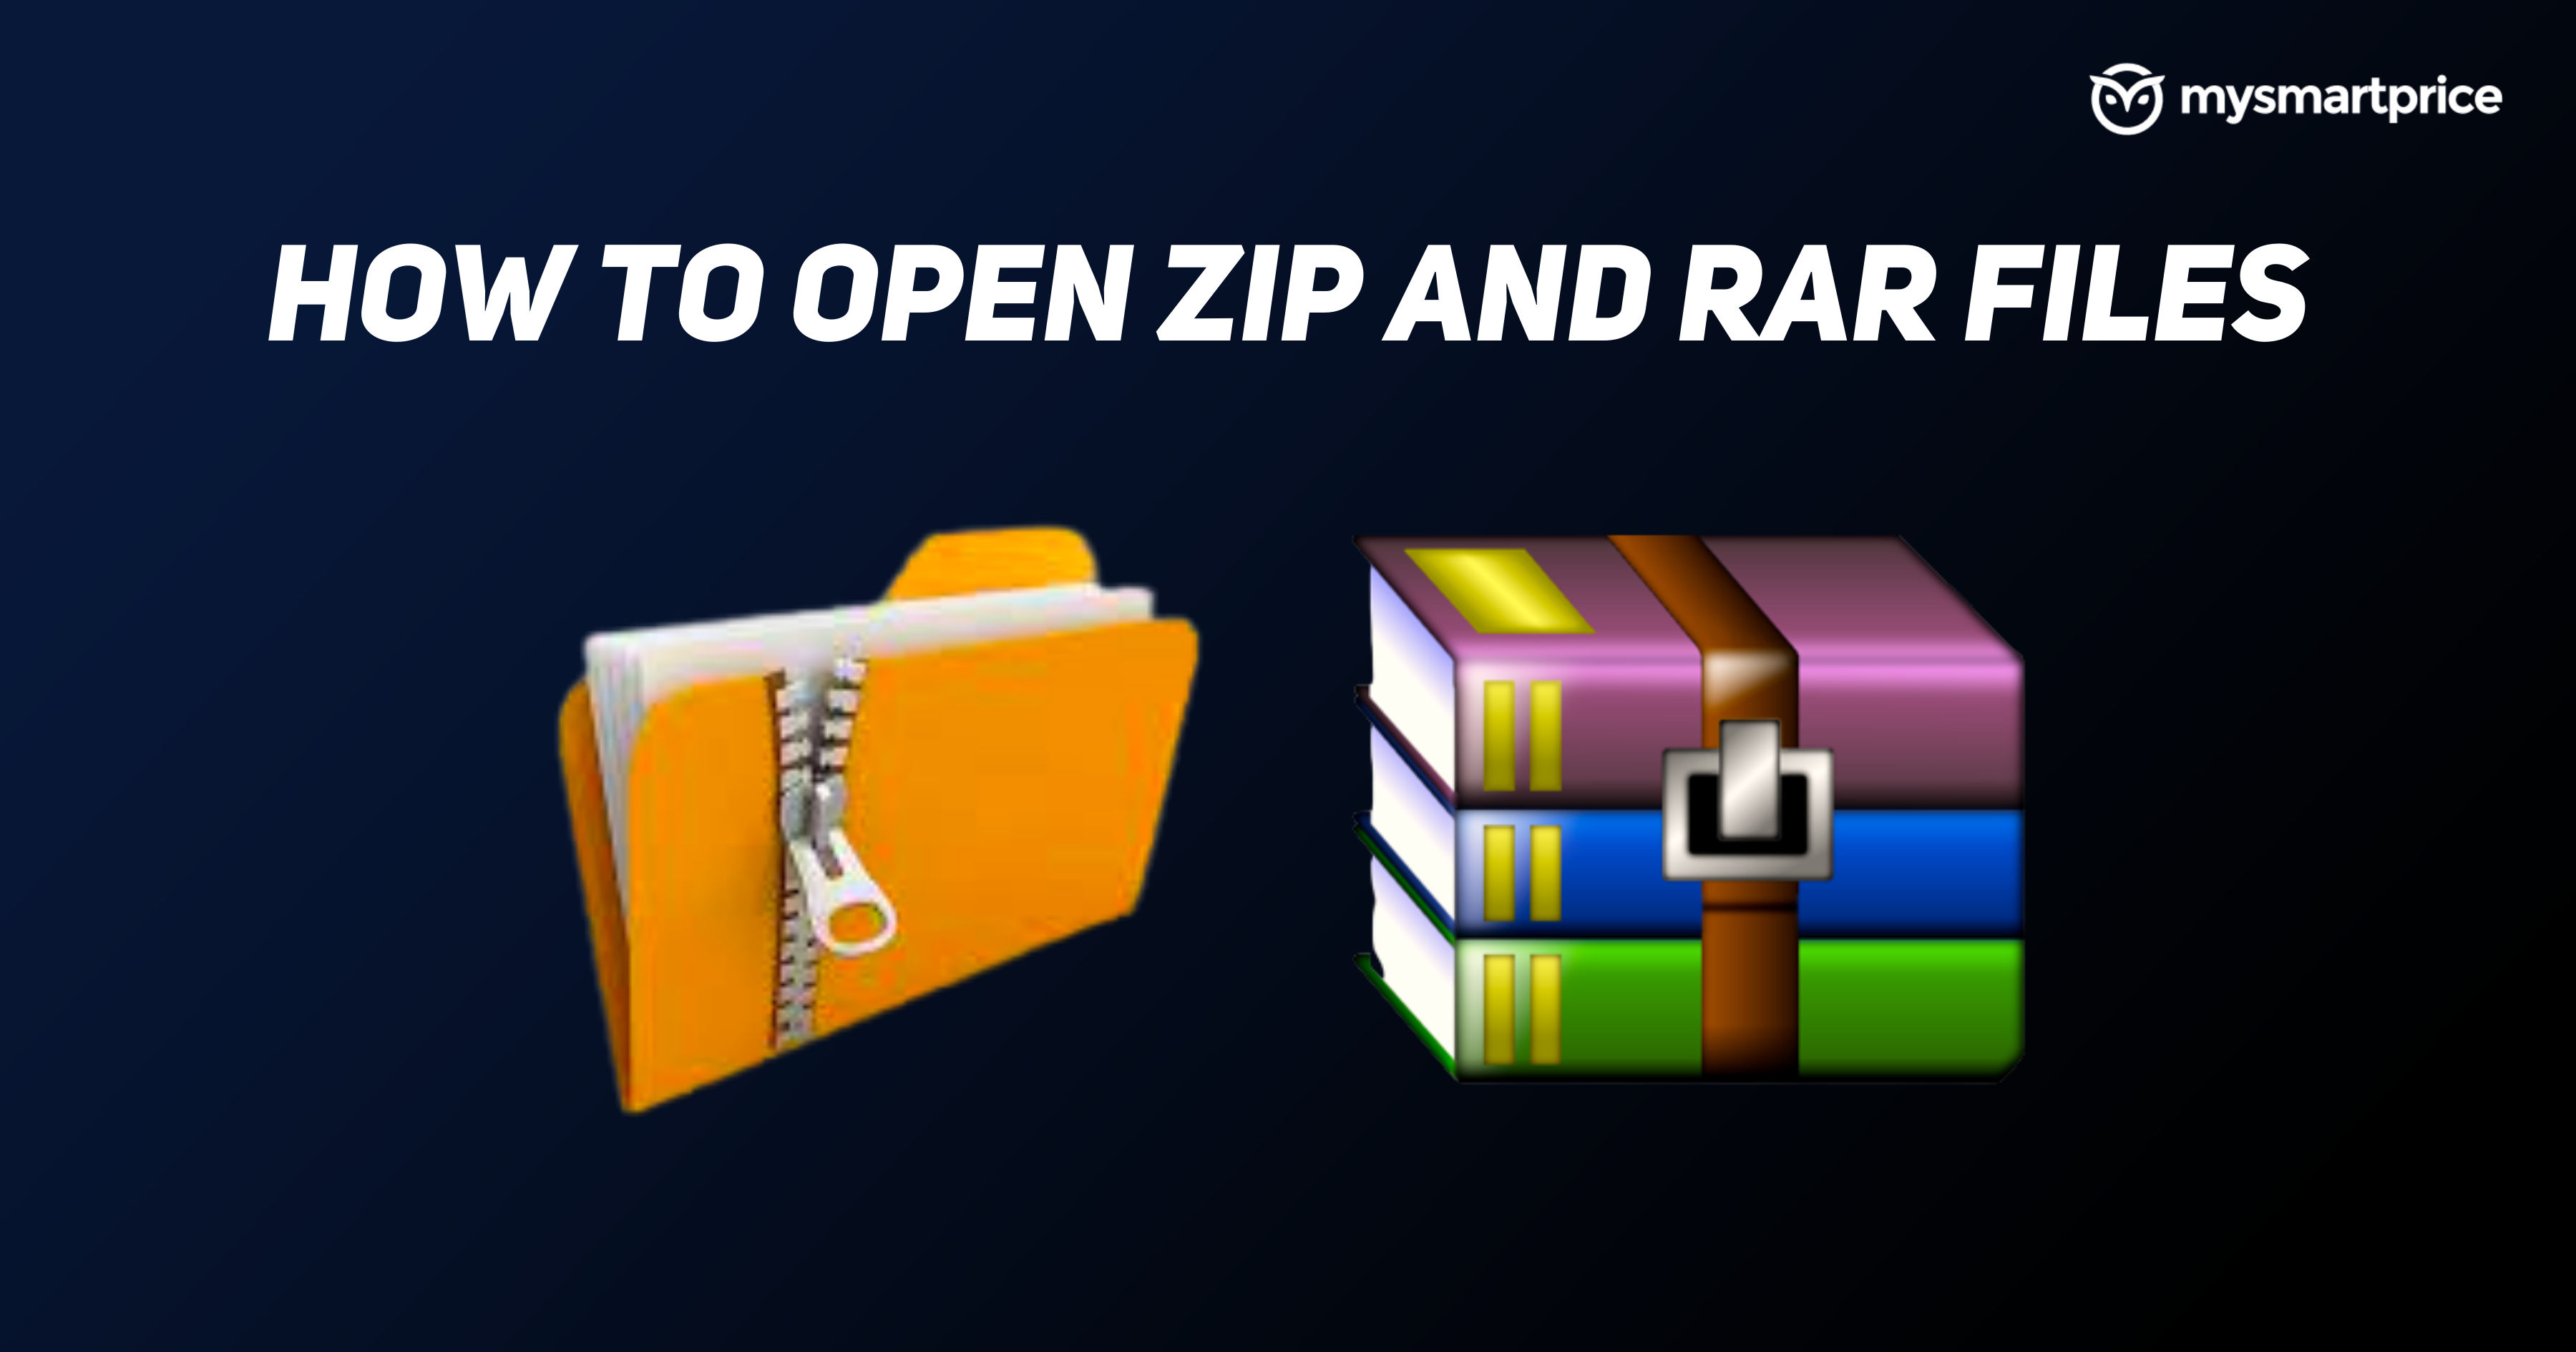 How To Open Zip File And Rar File On Windows, Android And Ios - Mysmartprice